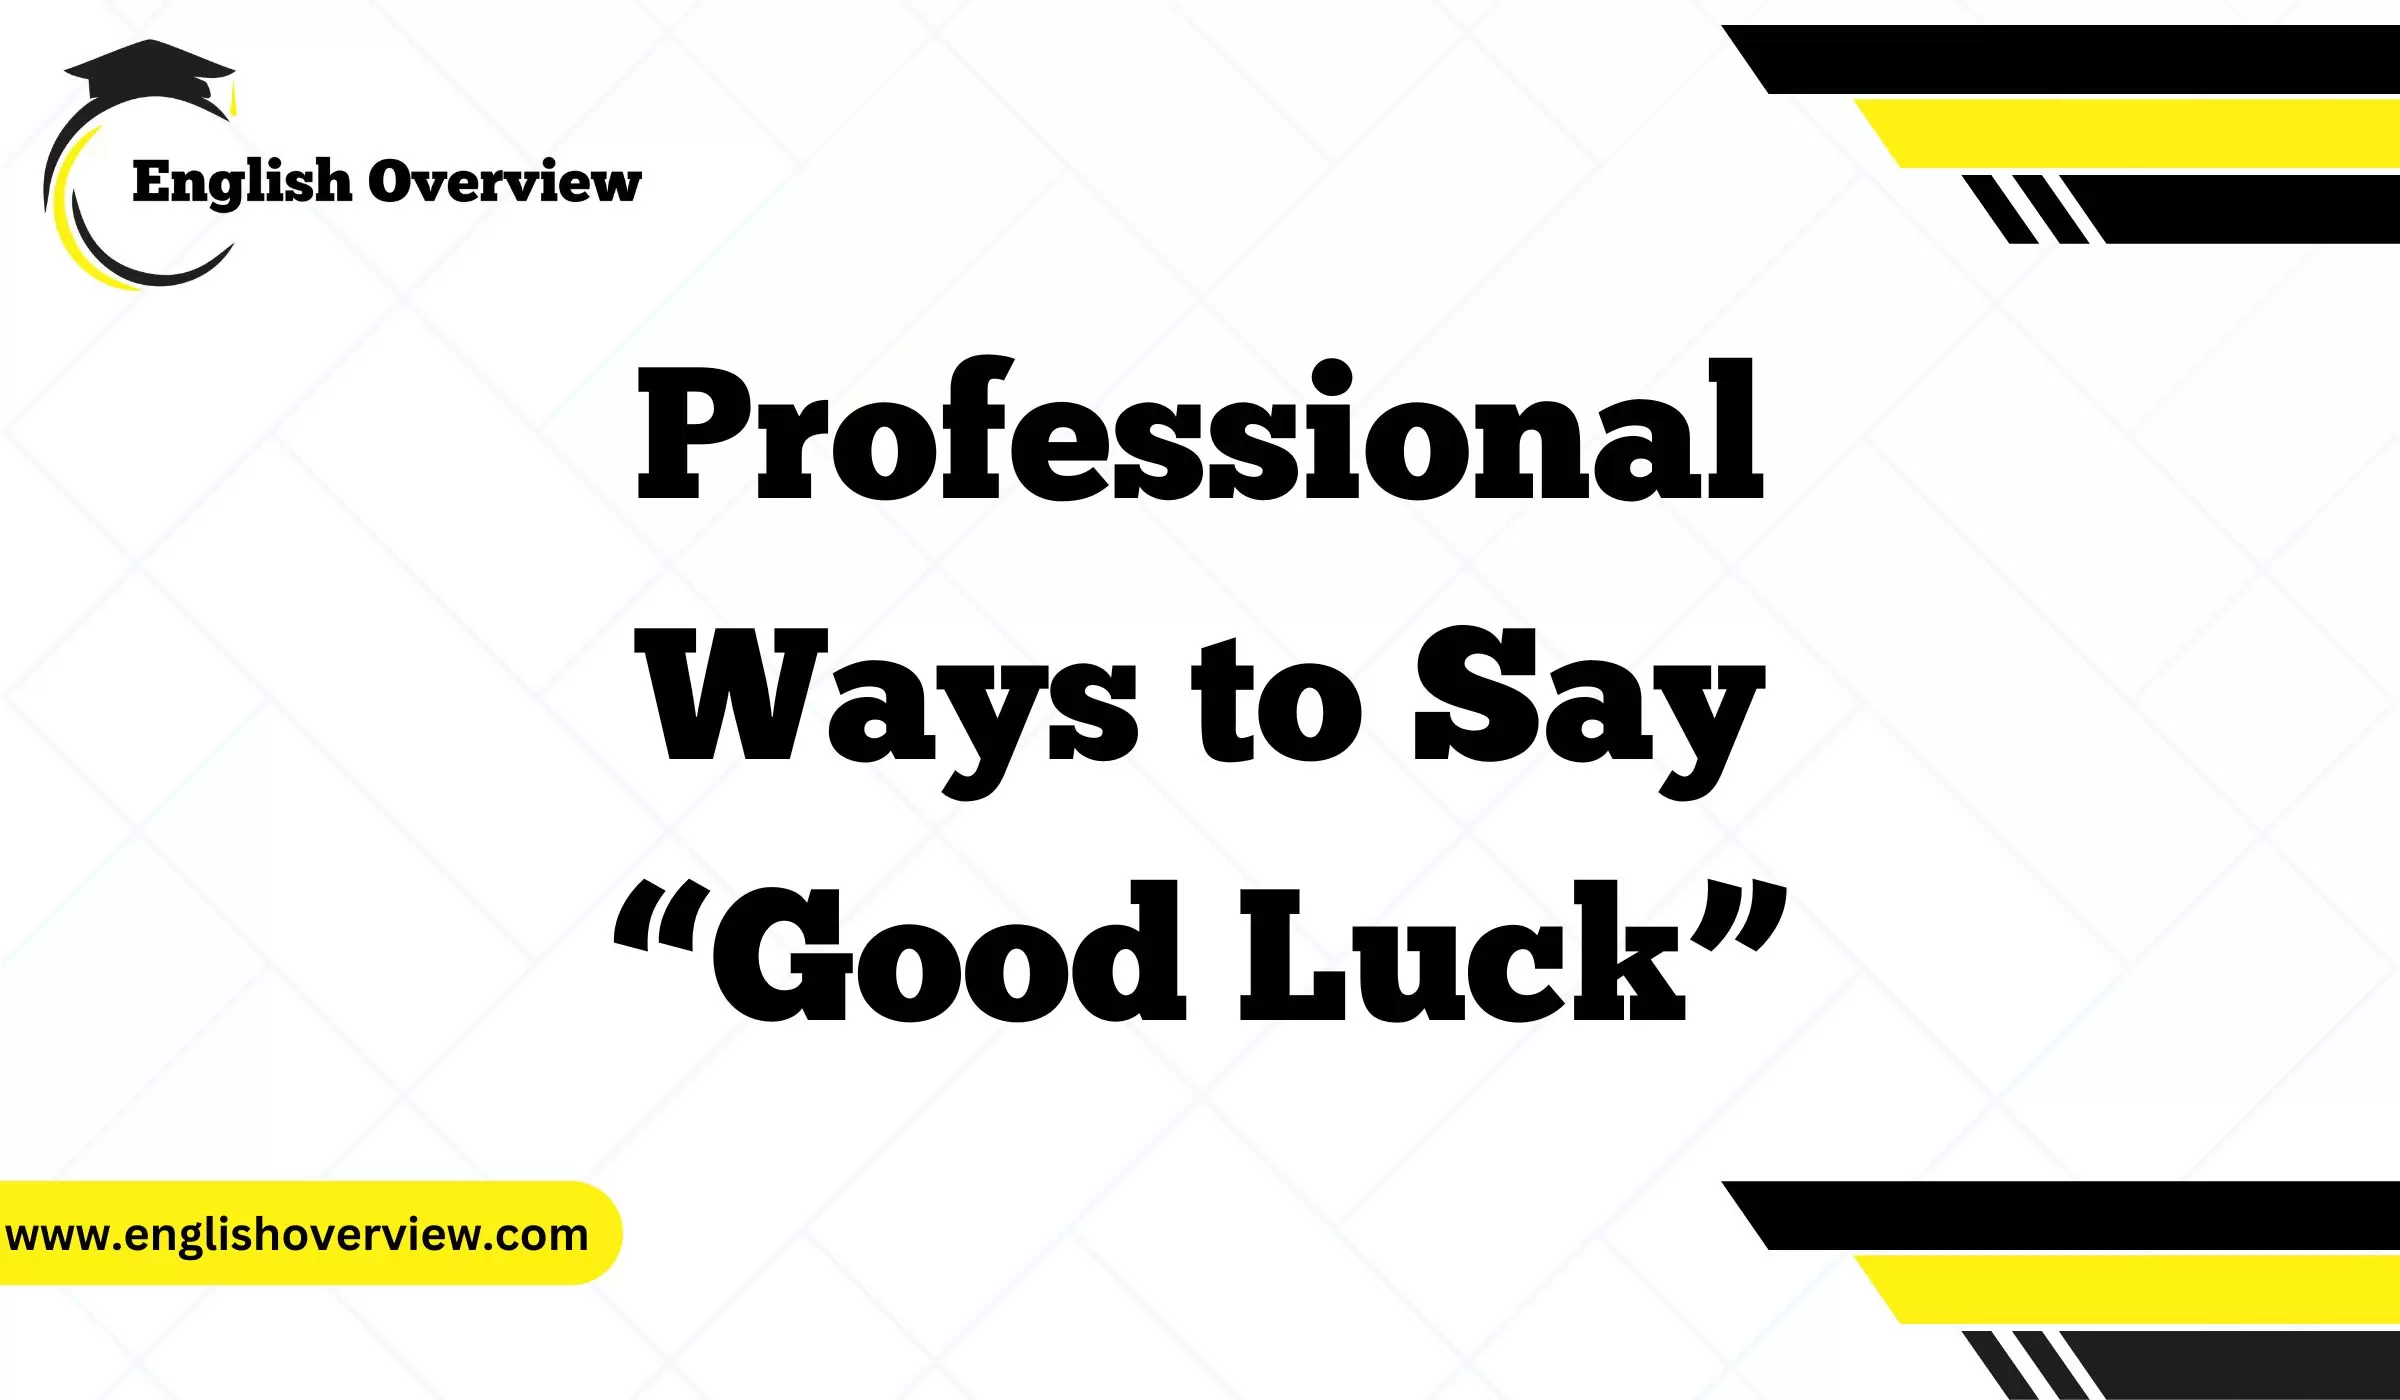 Professional Ways to Say “Good Luck”